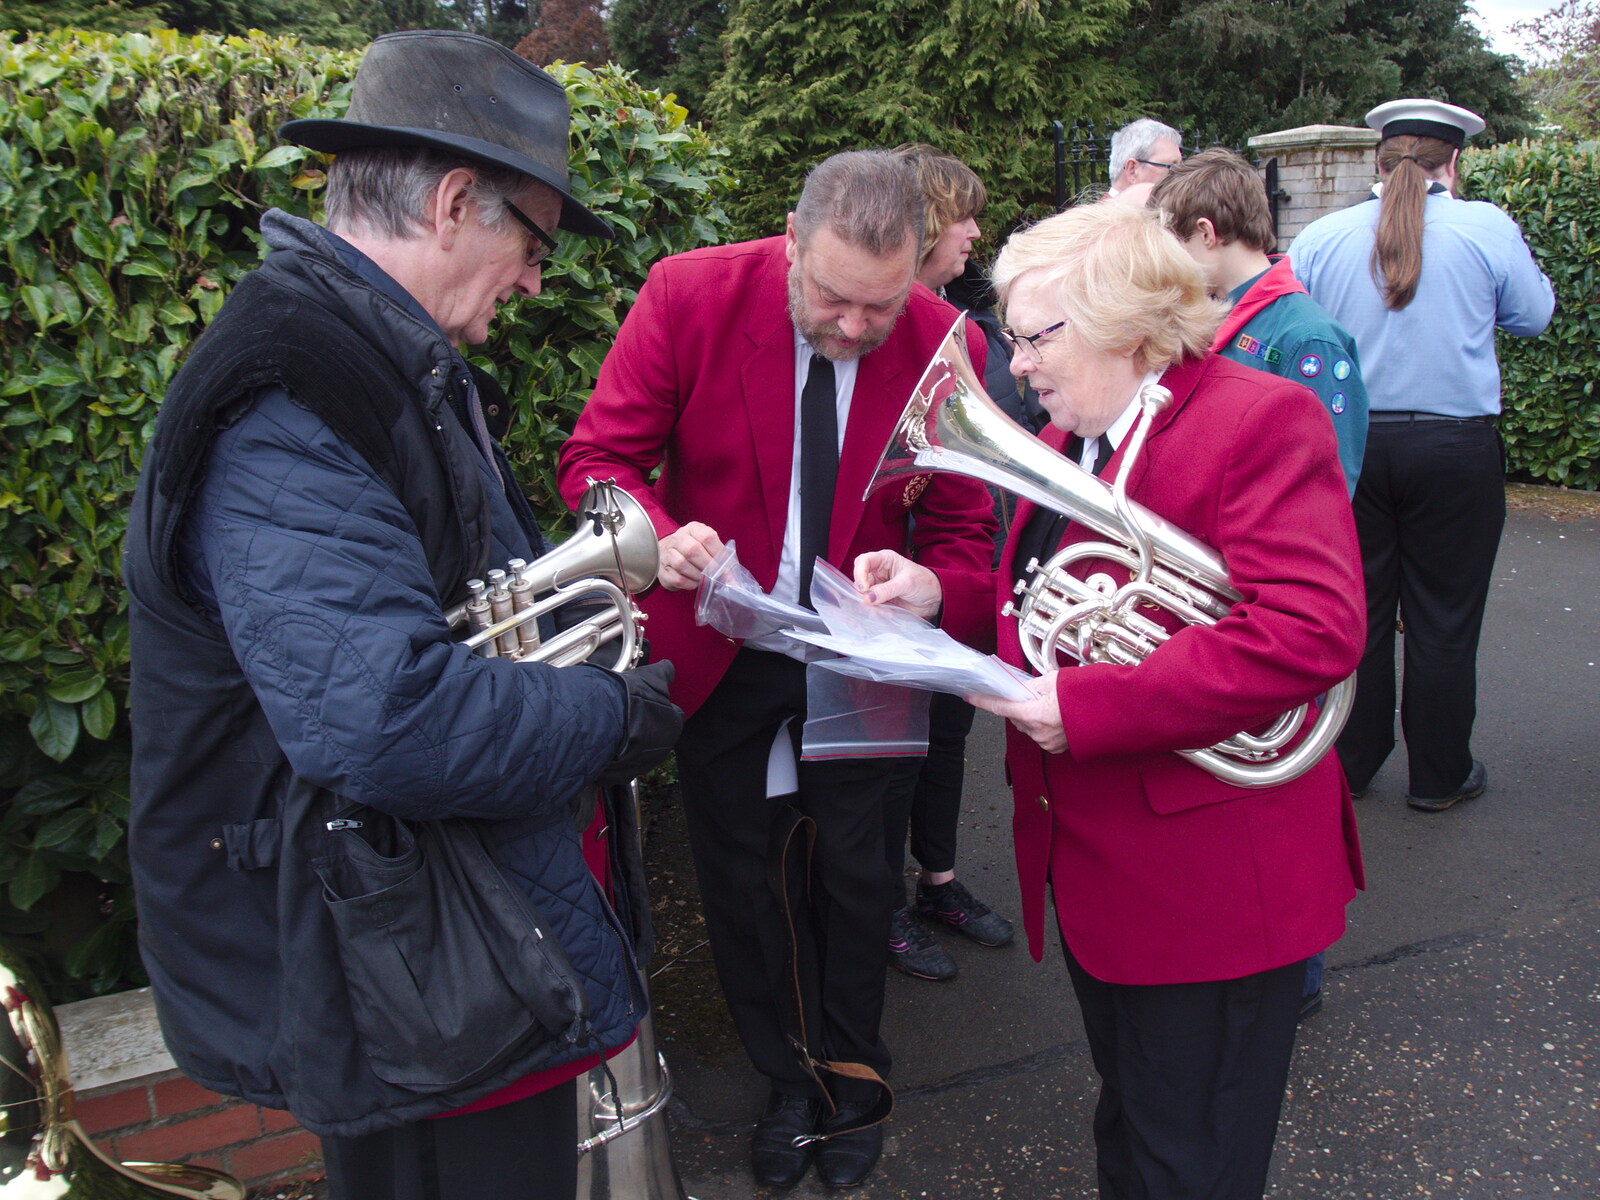 The band consults on the 'set list' from A St. George's Day Parade, Dickleburgh, Norfolk - 28th April 2019